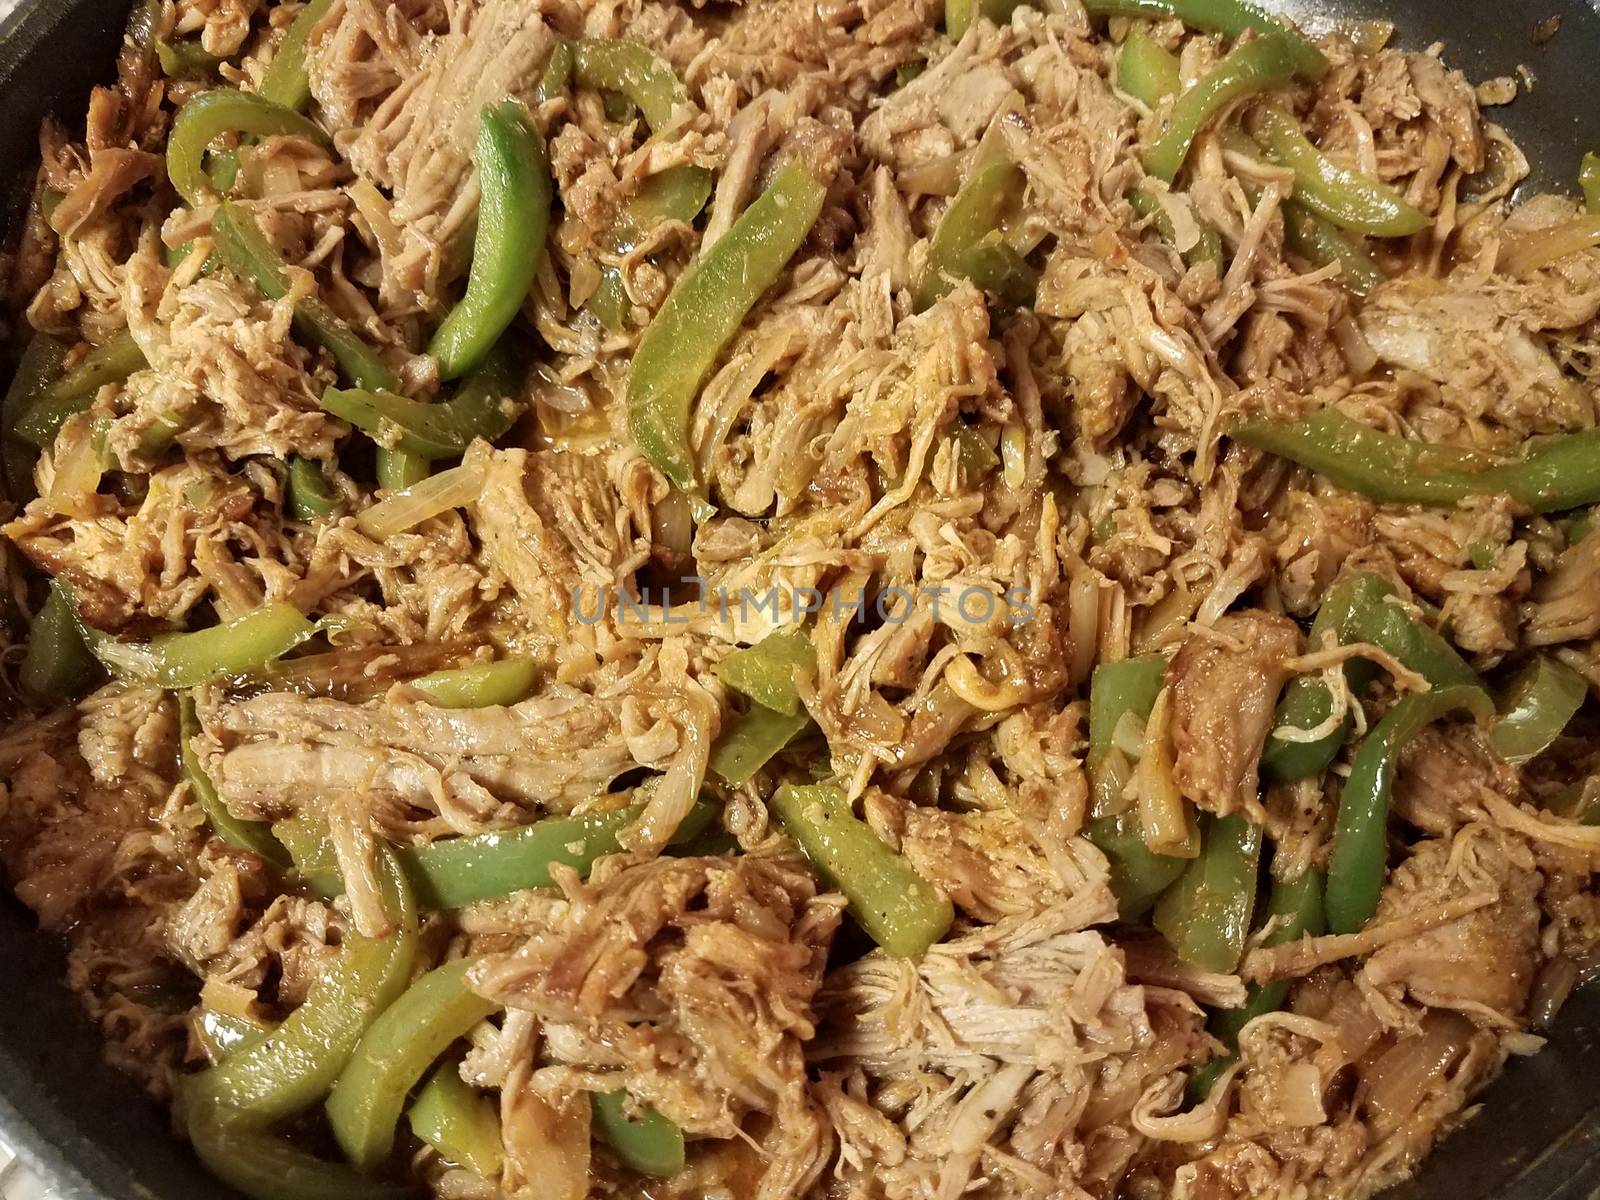 frying pan with pulled pork and green peppers by stockphotofan1